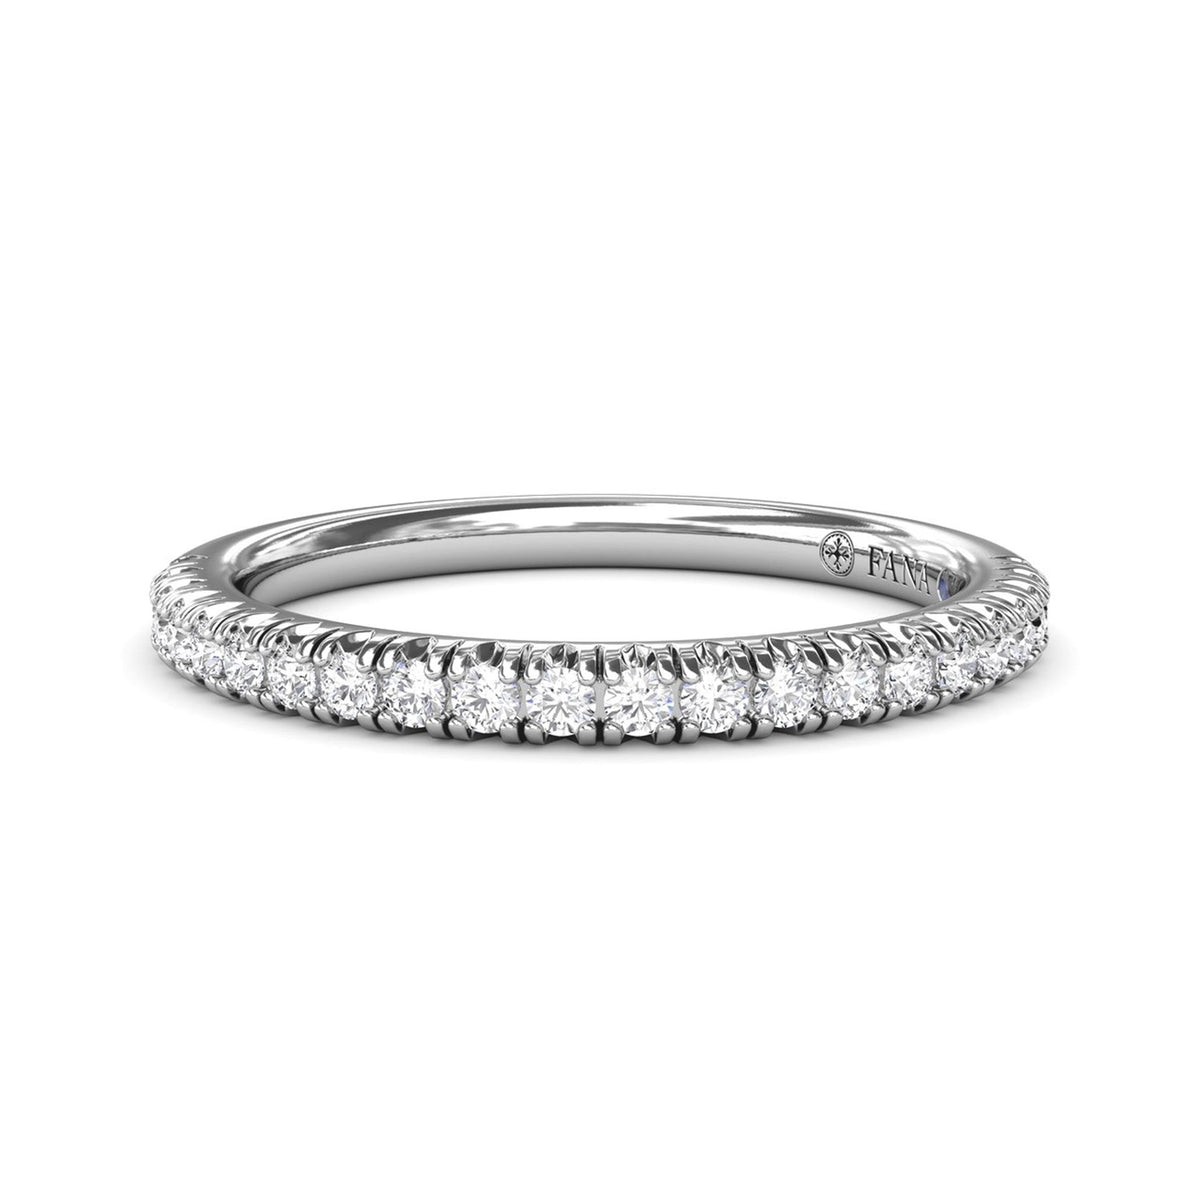 14Kt White Gold Prong Set Wedding Ring With 0.28cttw Natural Diamonds